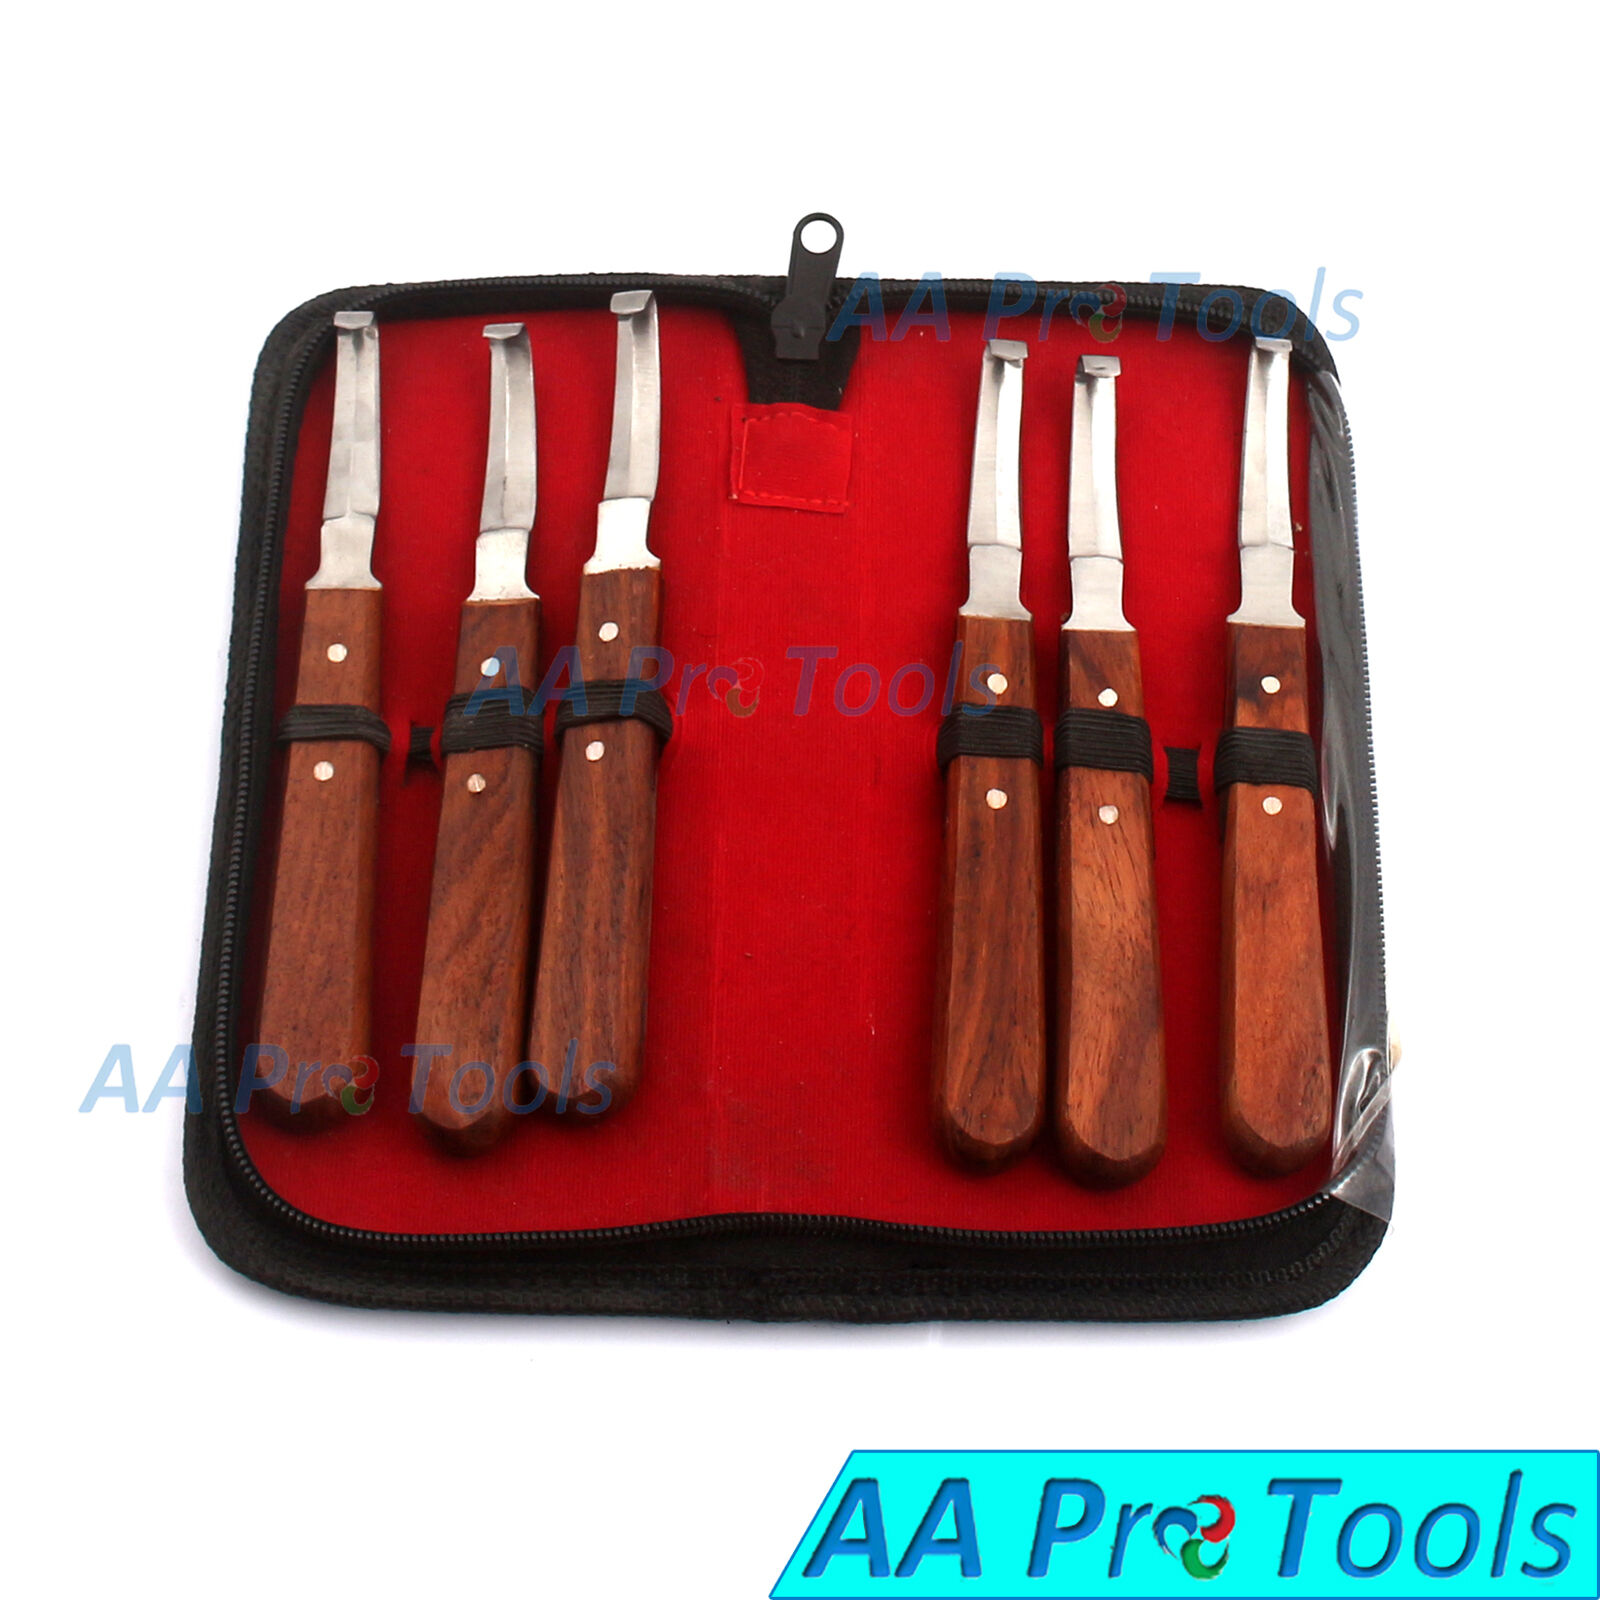 6 Farrier Hoof Knives Equine Veterinary Horse Knife, w/Leather Pouch Kit AA-0057